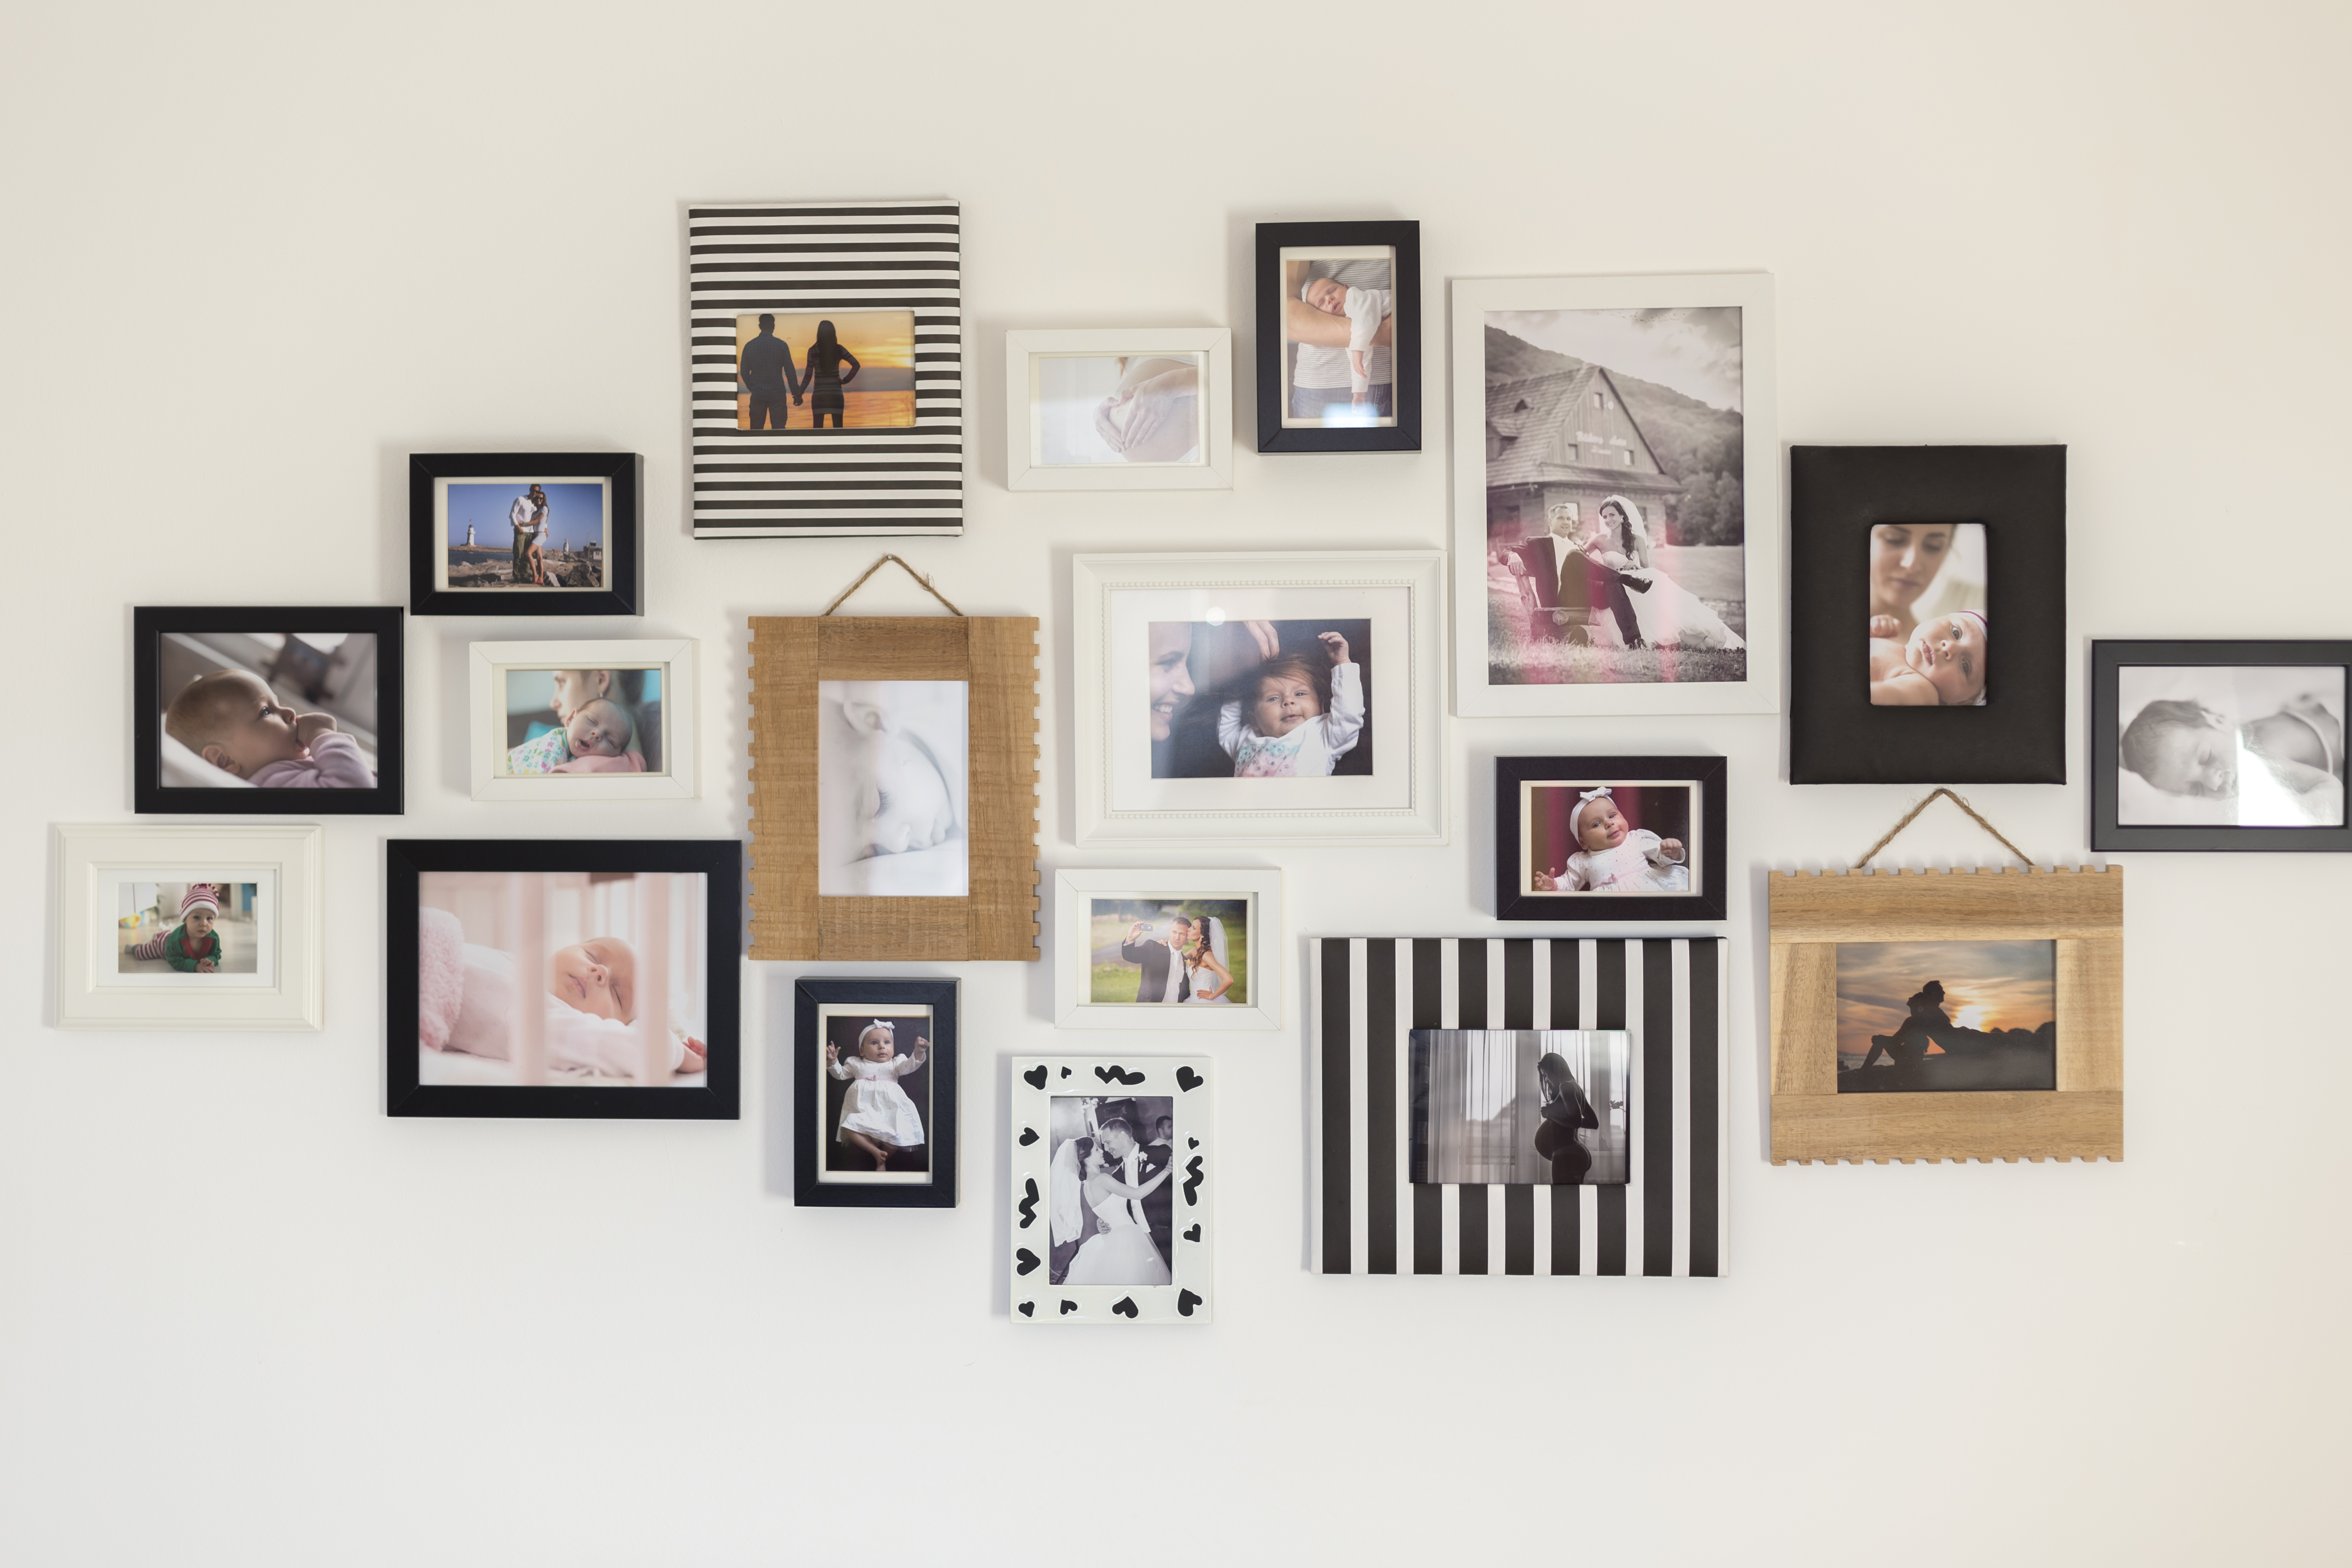 [Wall Gallery of Framed Family Photos]